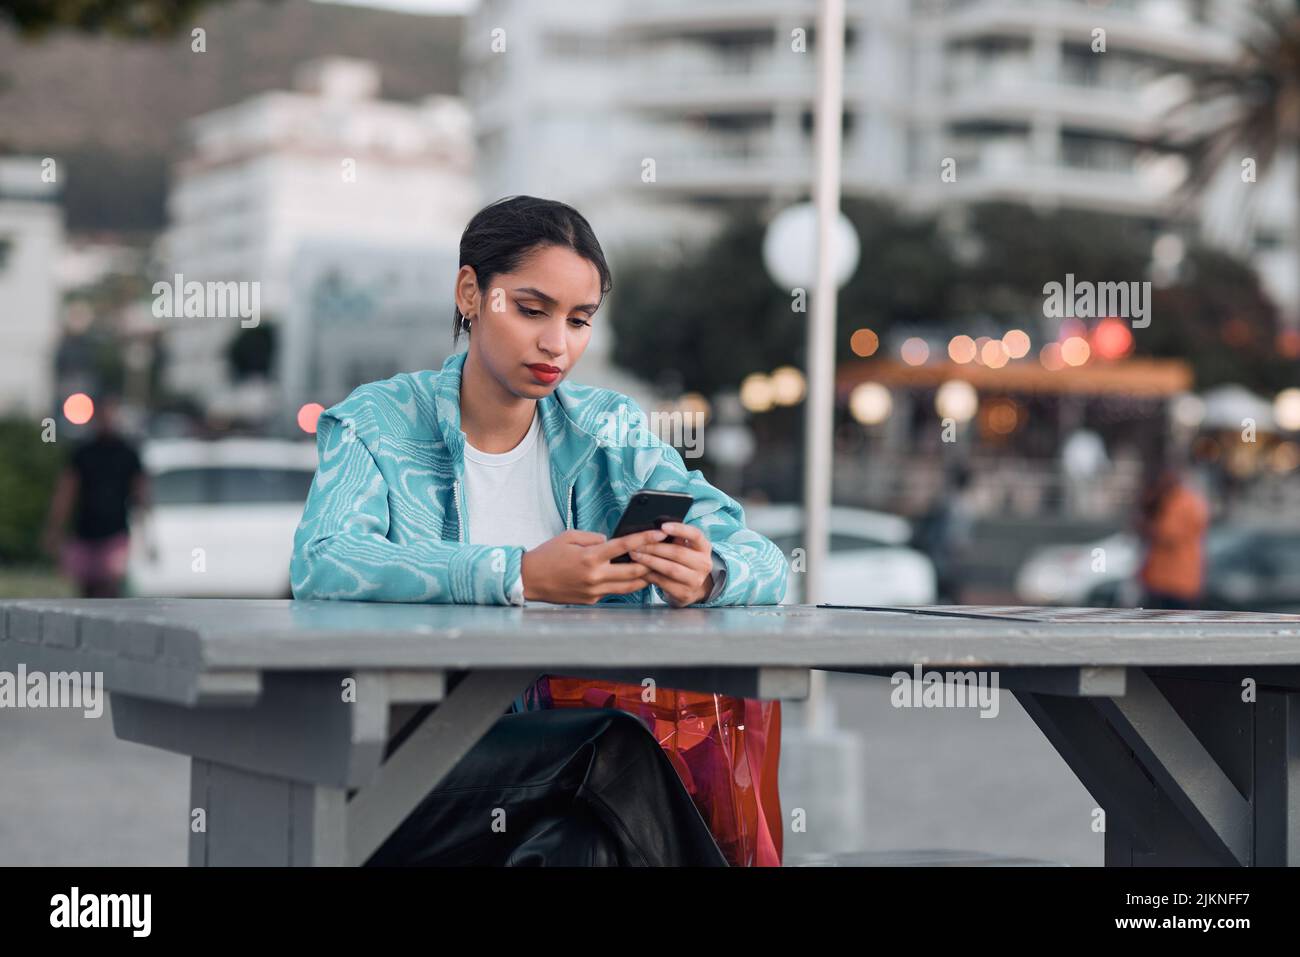 Edgy, sad and lonely woman texting on social media dating app on a phone and looking serious, depressed or bored outside in an urban city. A single Stock Photo